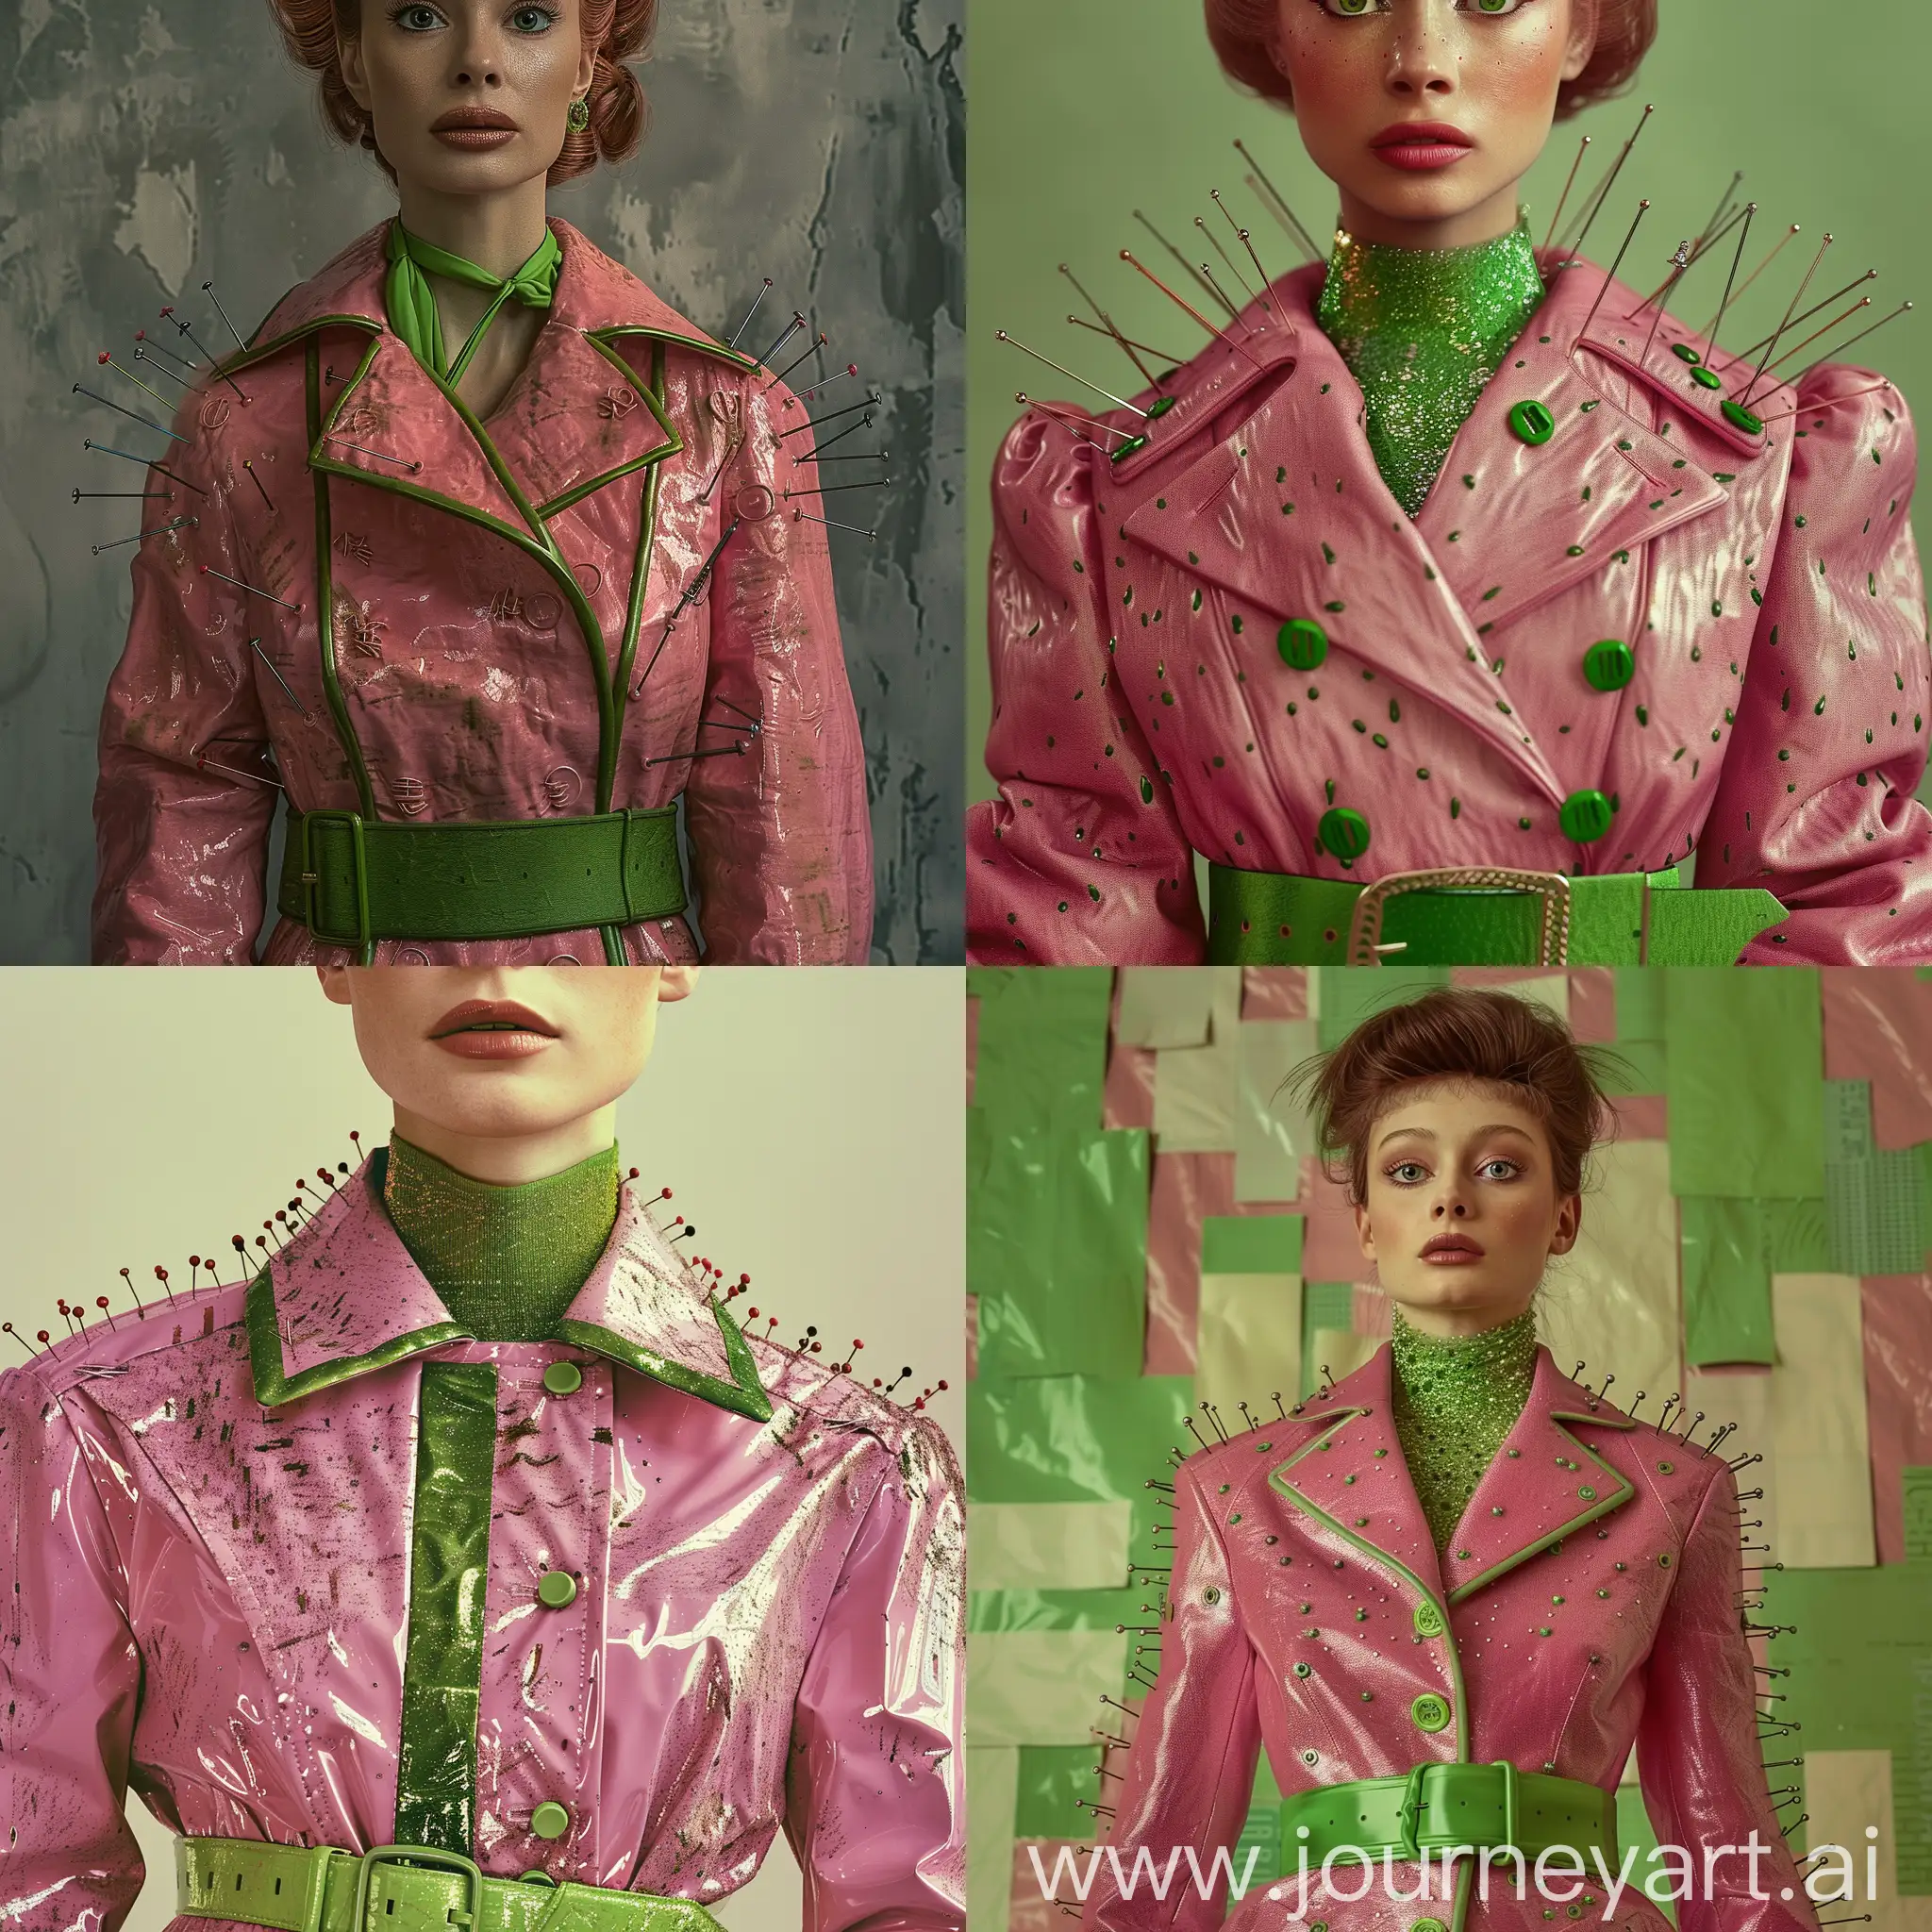 Fashionable-Pink-JacketCoat-with-Green-Belt-and-Pins-Audrey-Hepburn-Inspired-Look-for-Vogue-Photoshoot